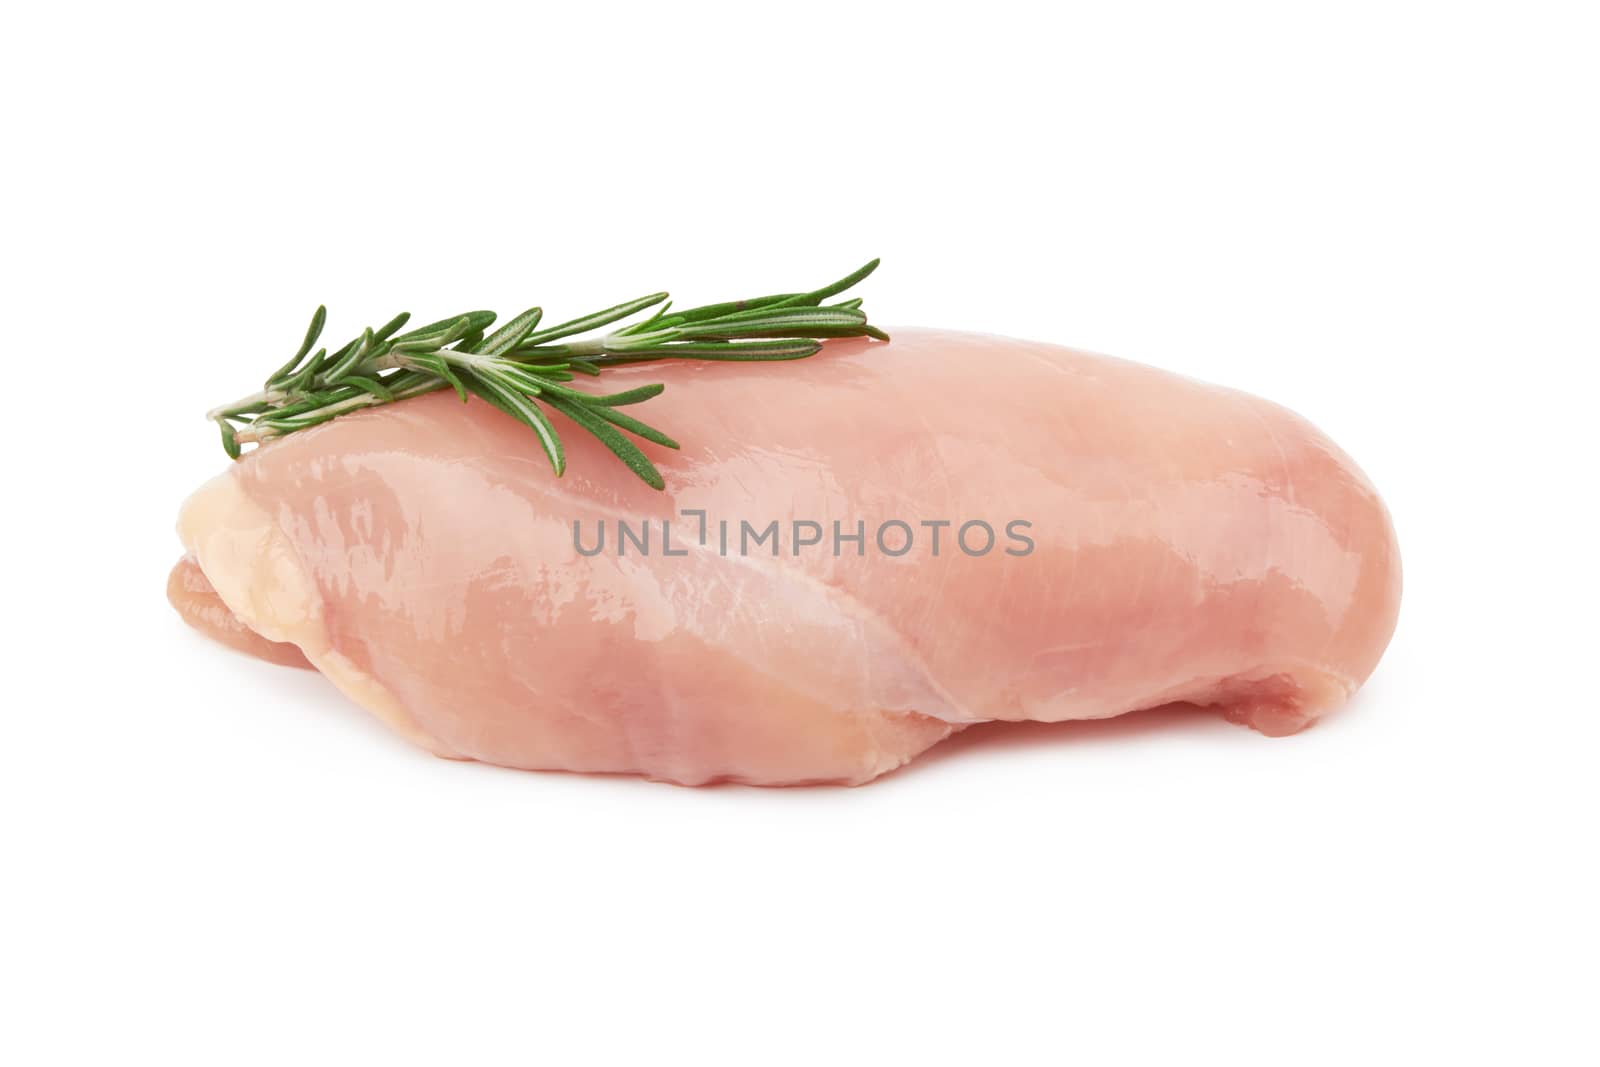 Raw chicken fillets isolated on white background